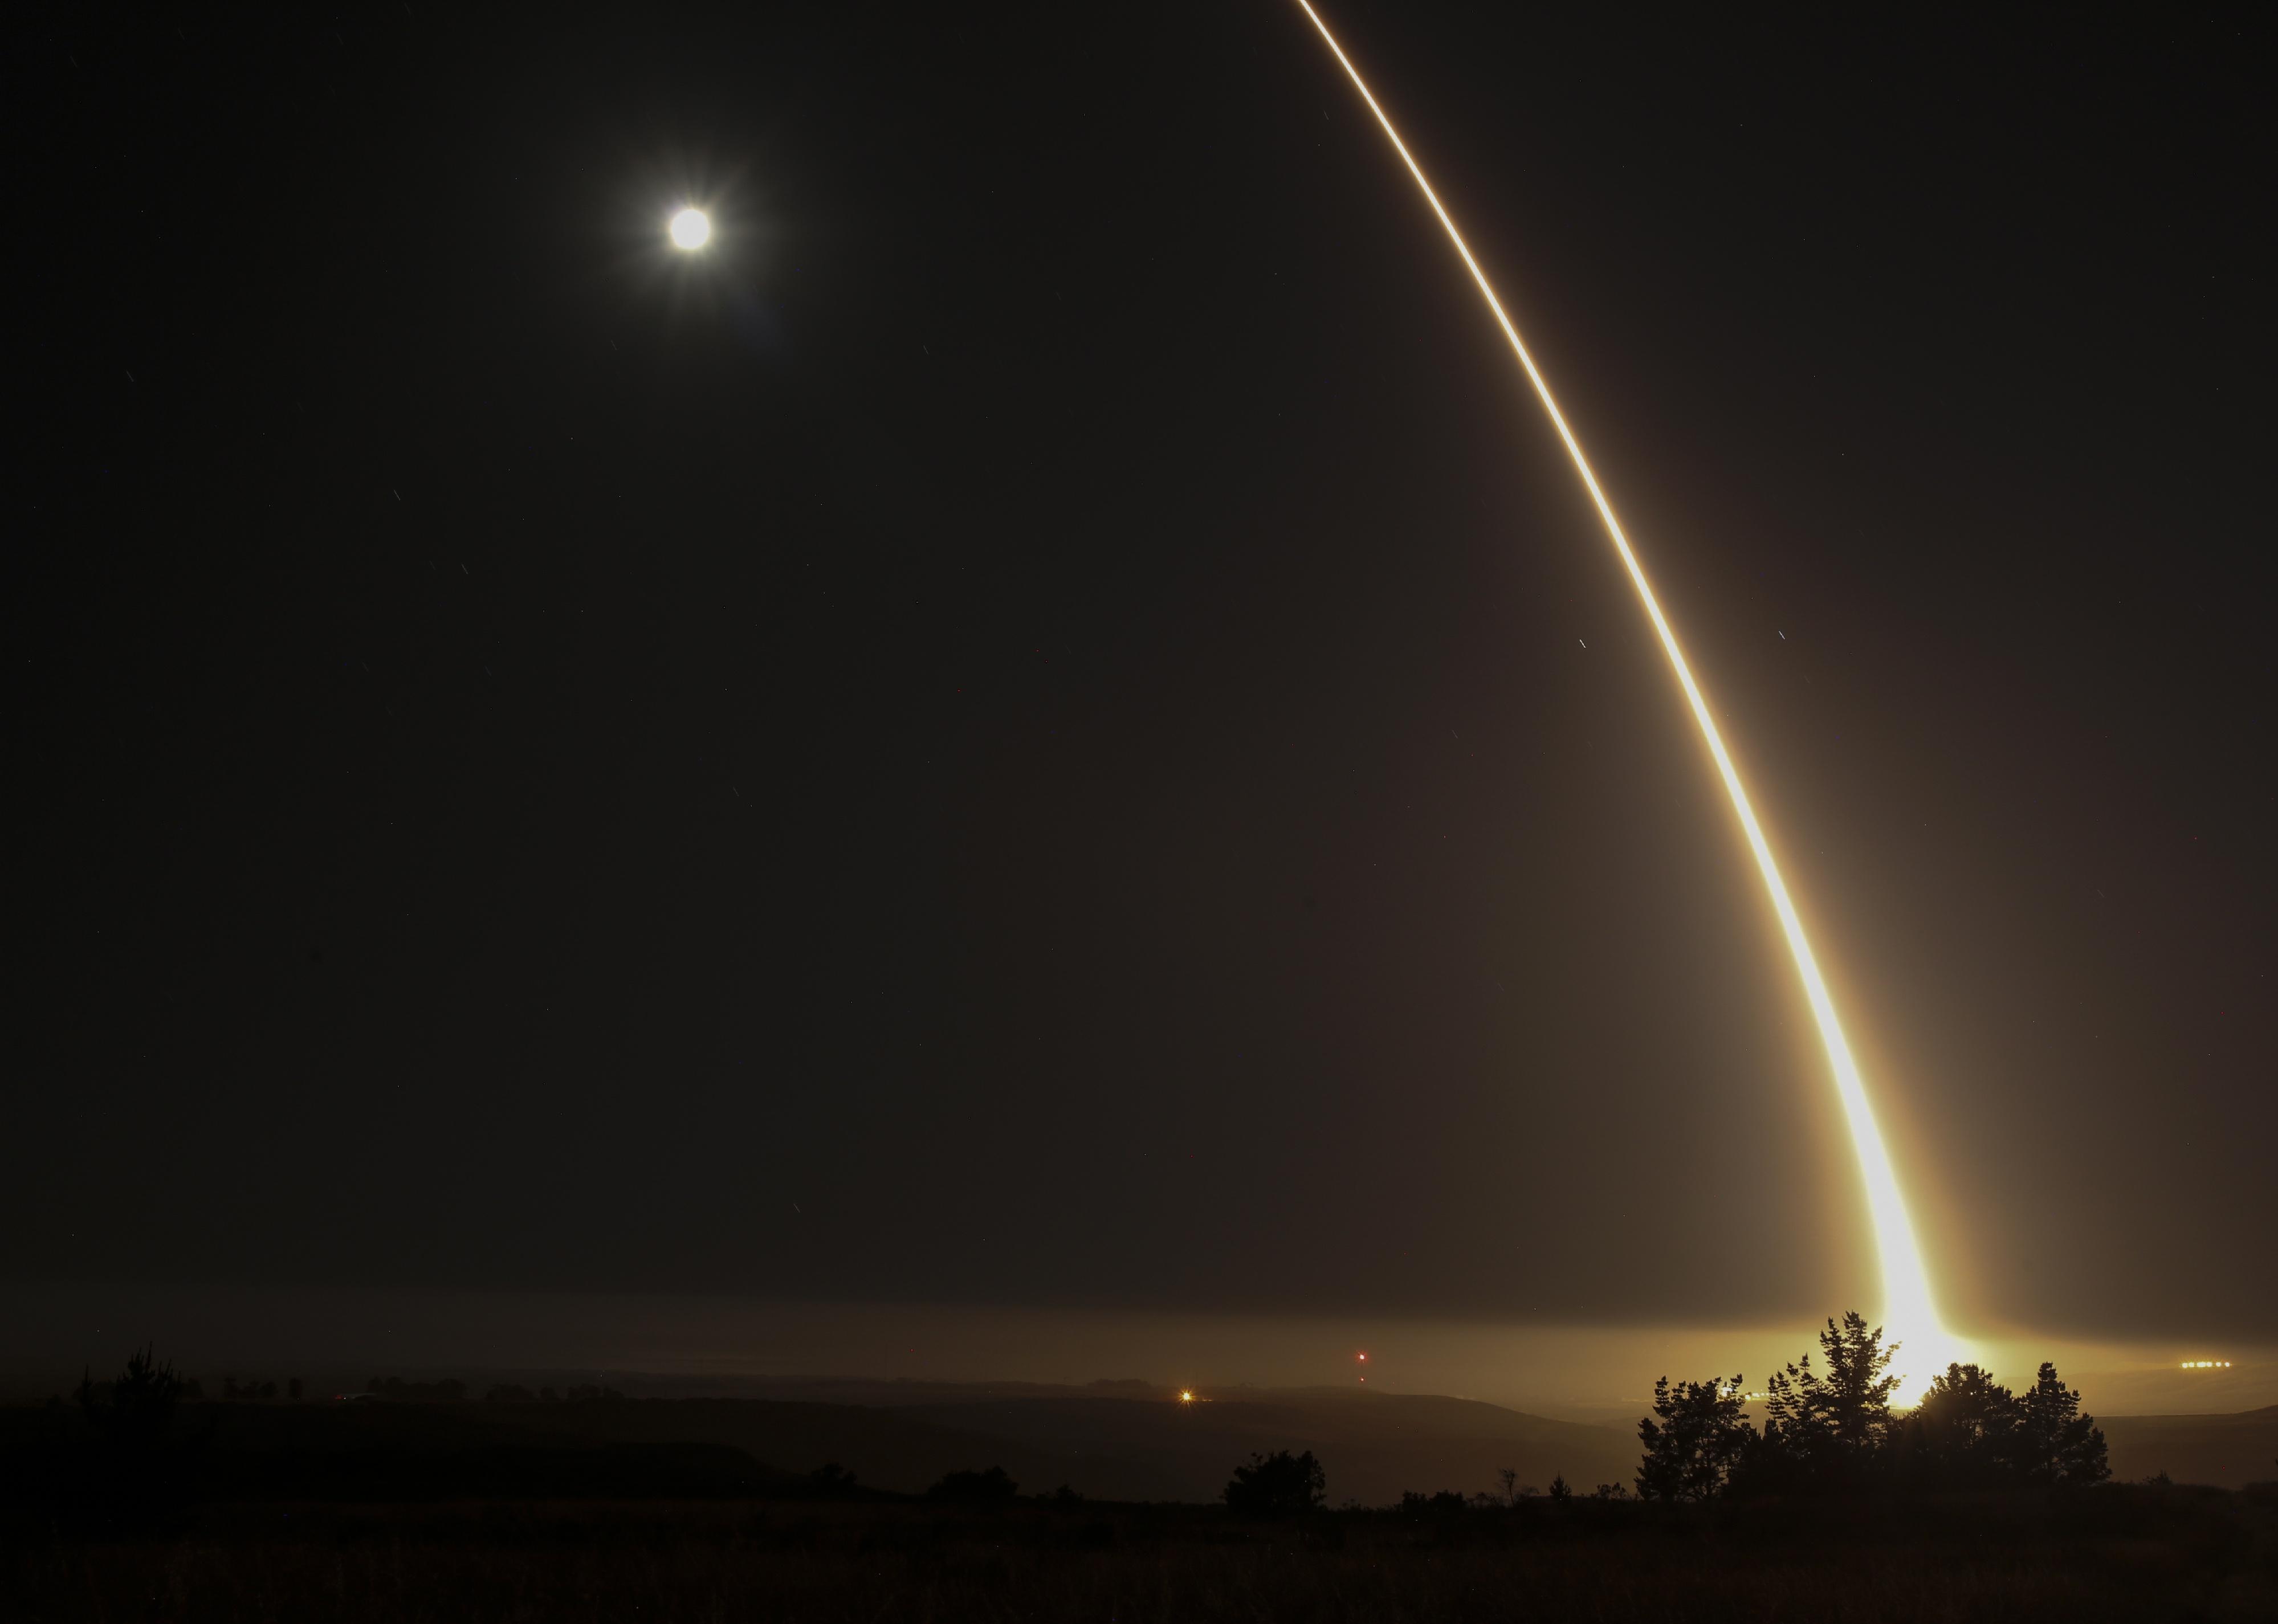 A streak of light in the night as a test missile goes across the sky.